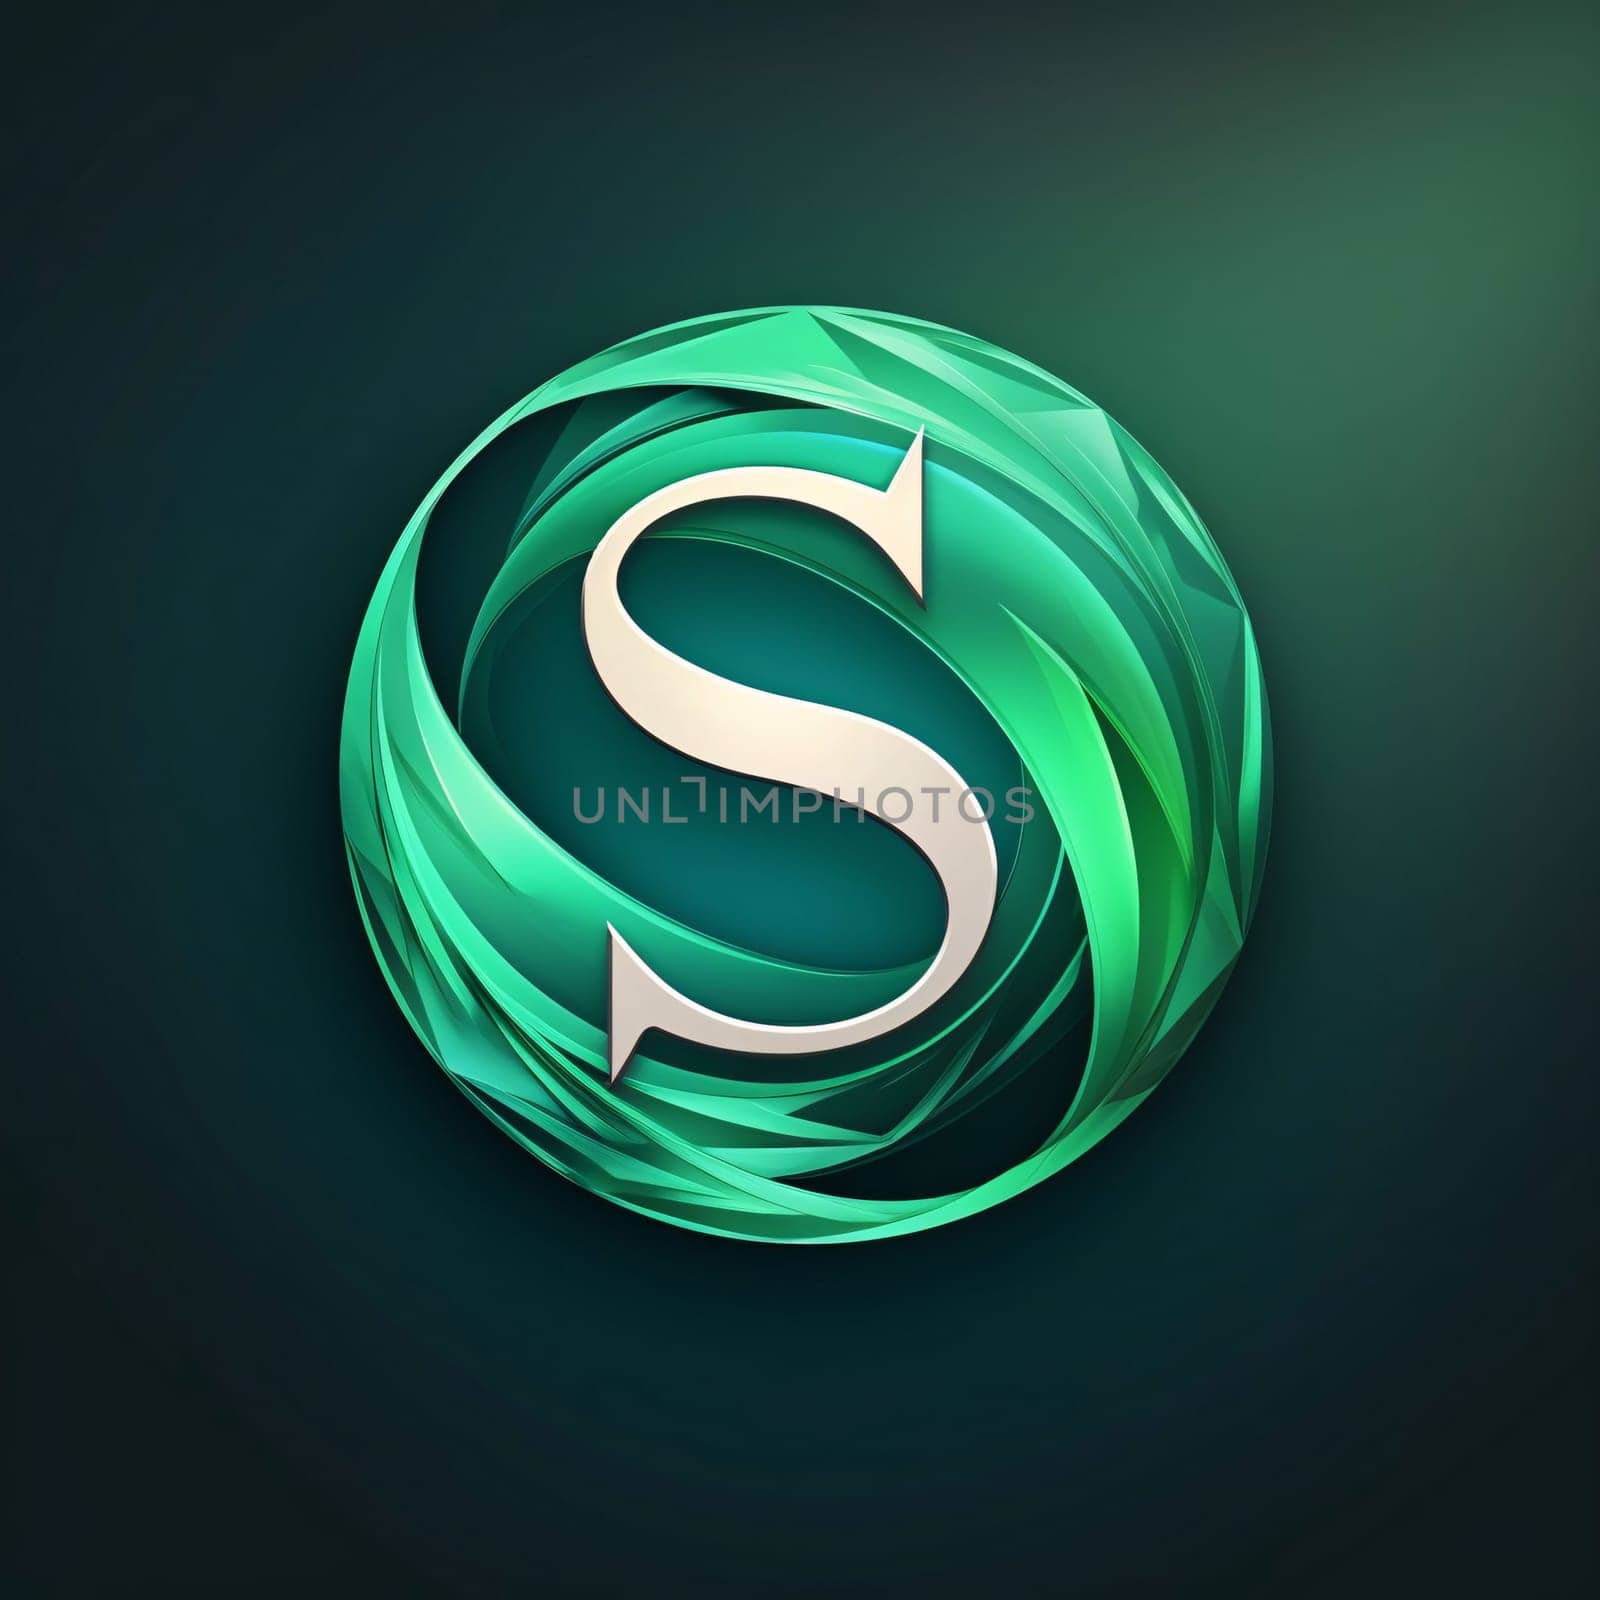 Graphic alphabet letters: Vector illustration of a stylized letter S in the form of a sphere.